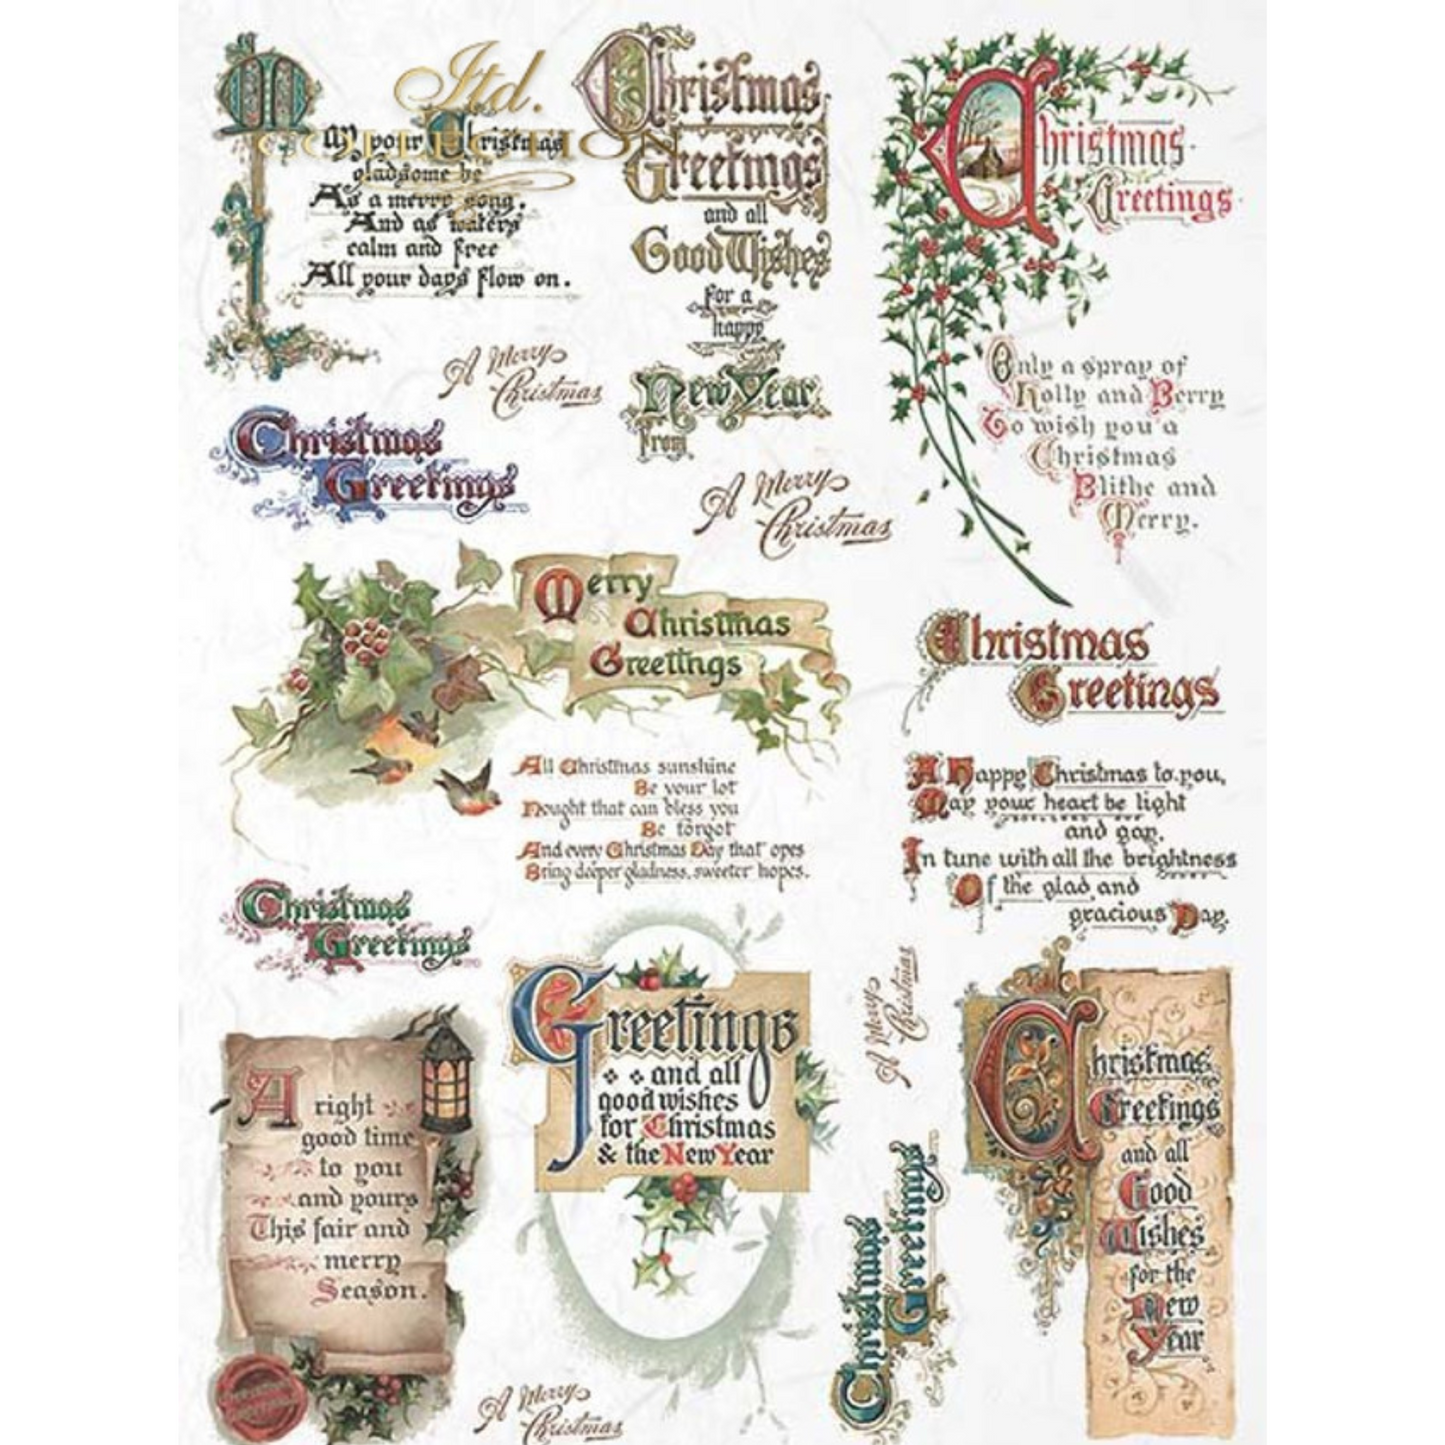 "Christmas Greetings" decoupage rice paper by ITD Collection. Available at Milton's Daughter.